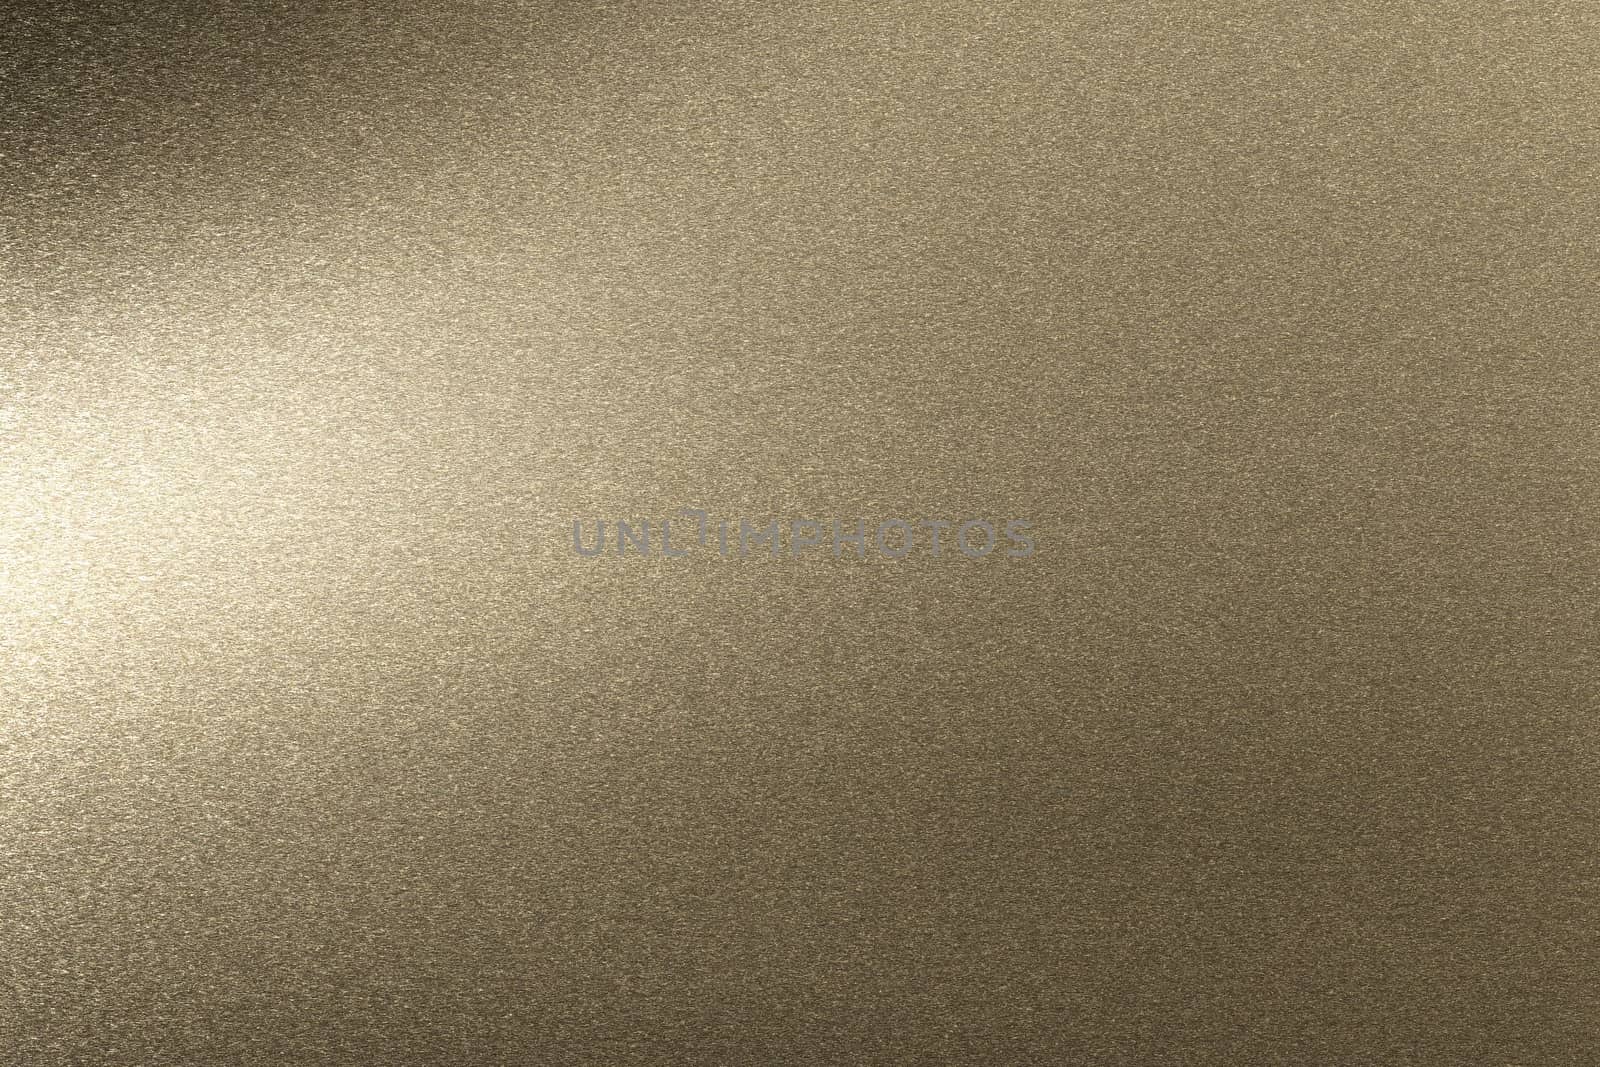 Rough brown metallic sheet, abstract texture background